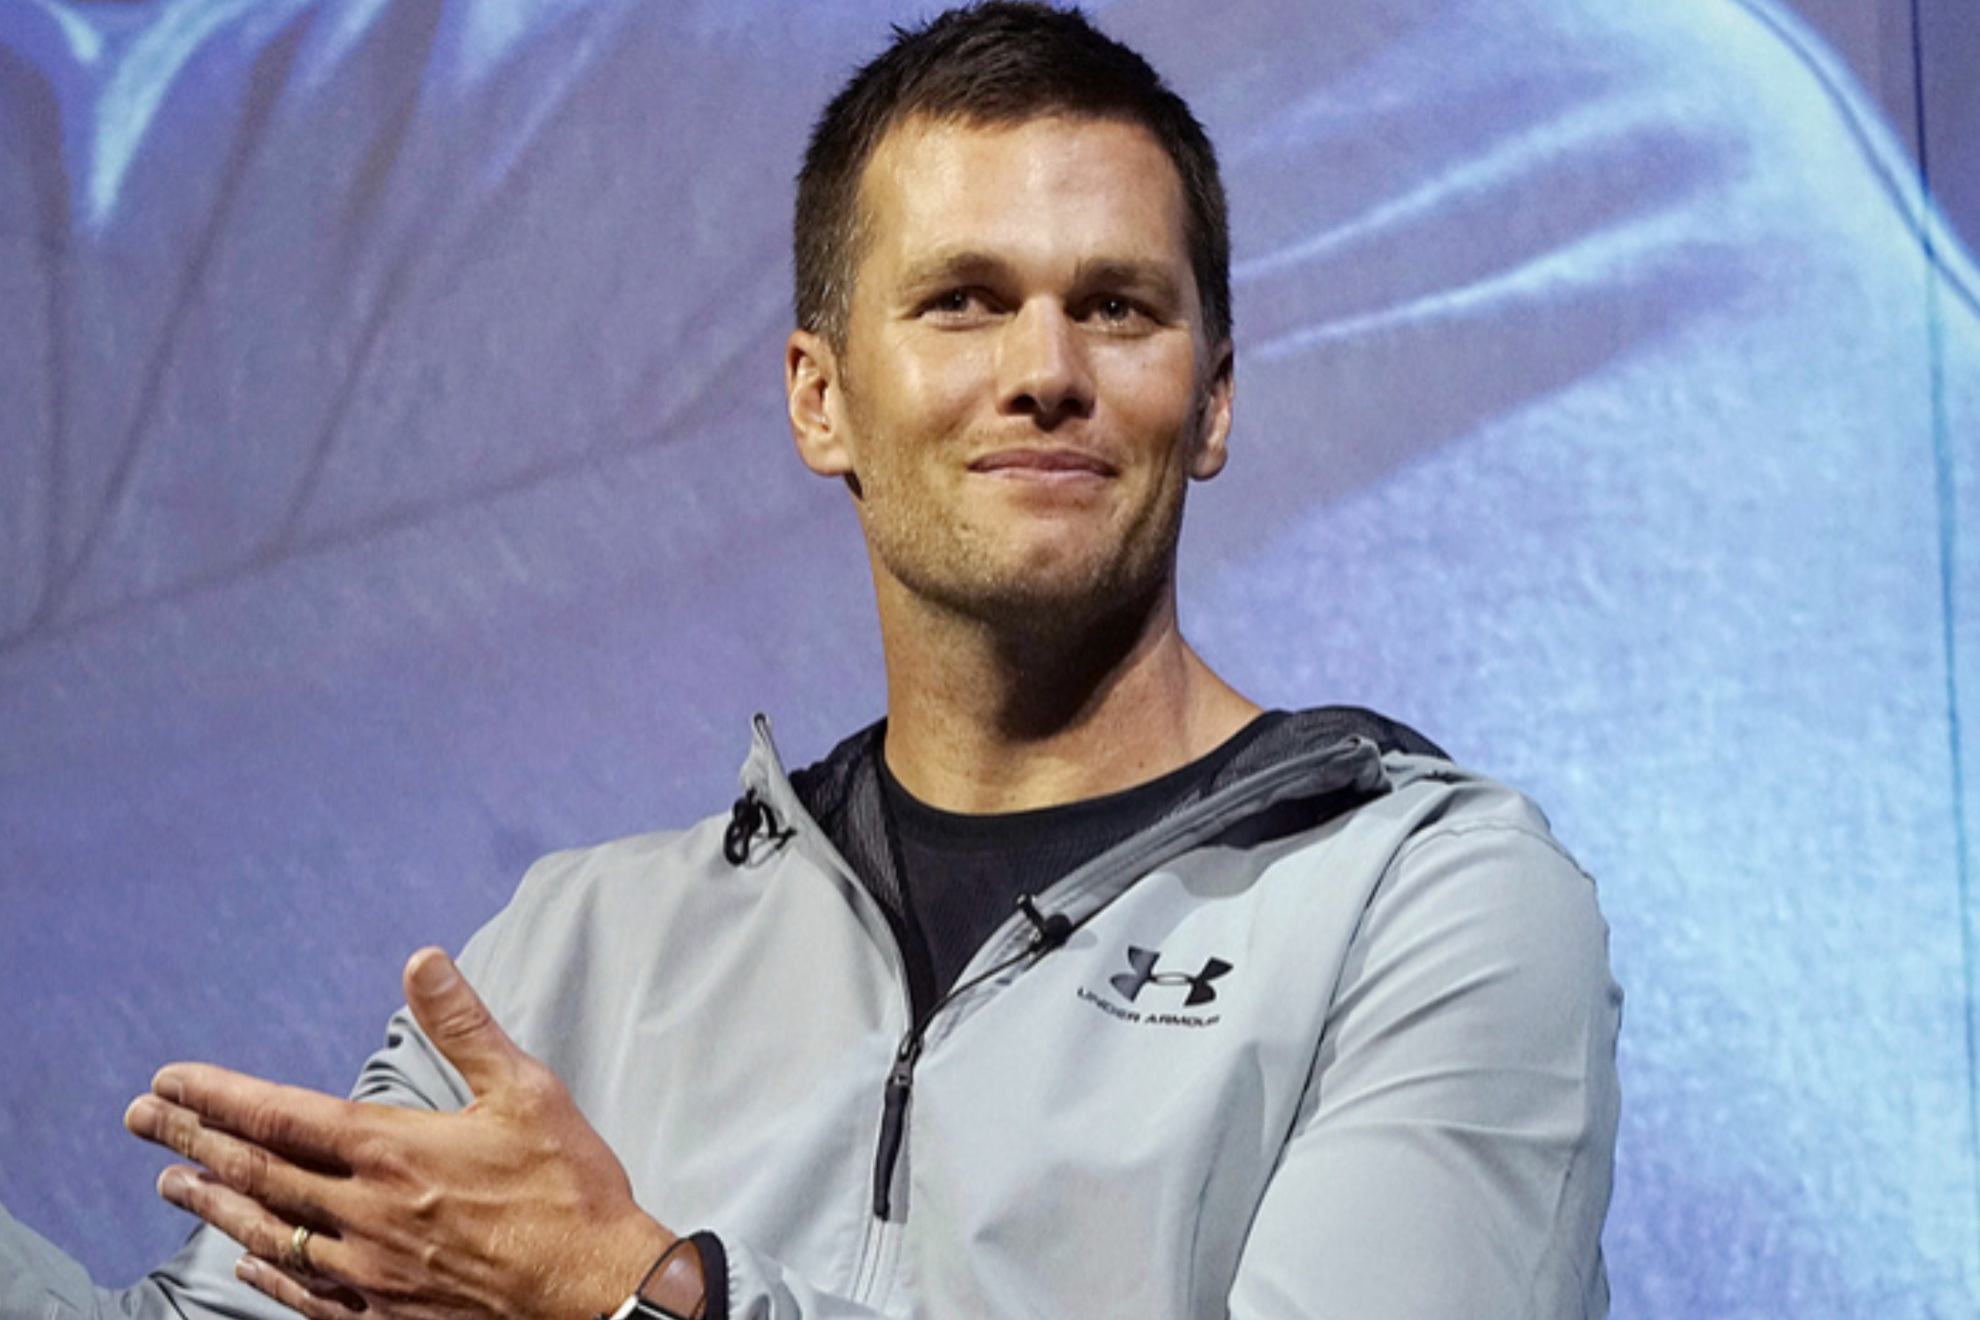 Tom Brady's shirtless sprints raise eyebrows, proves he's in top shape